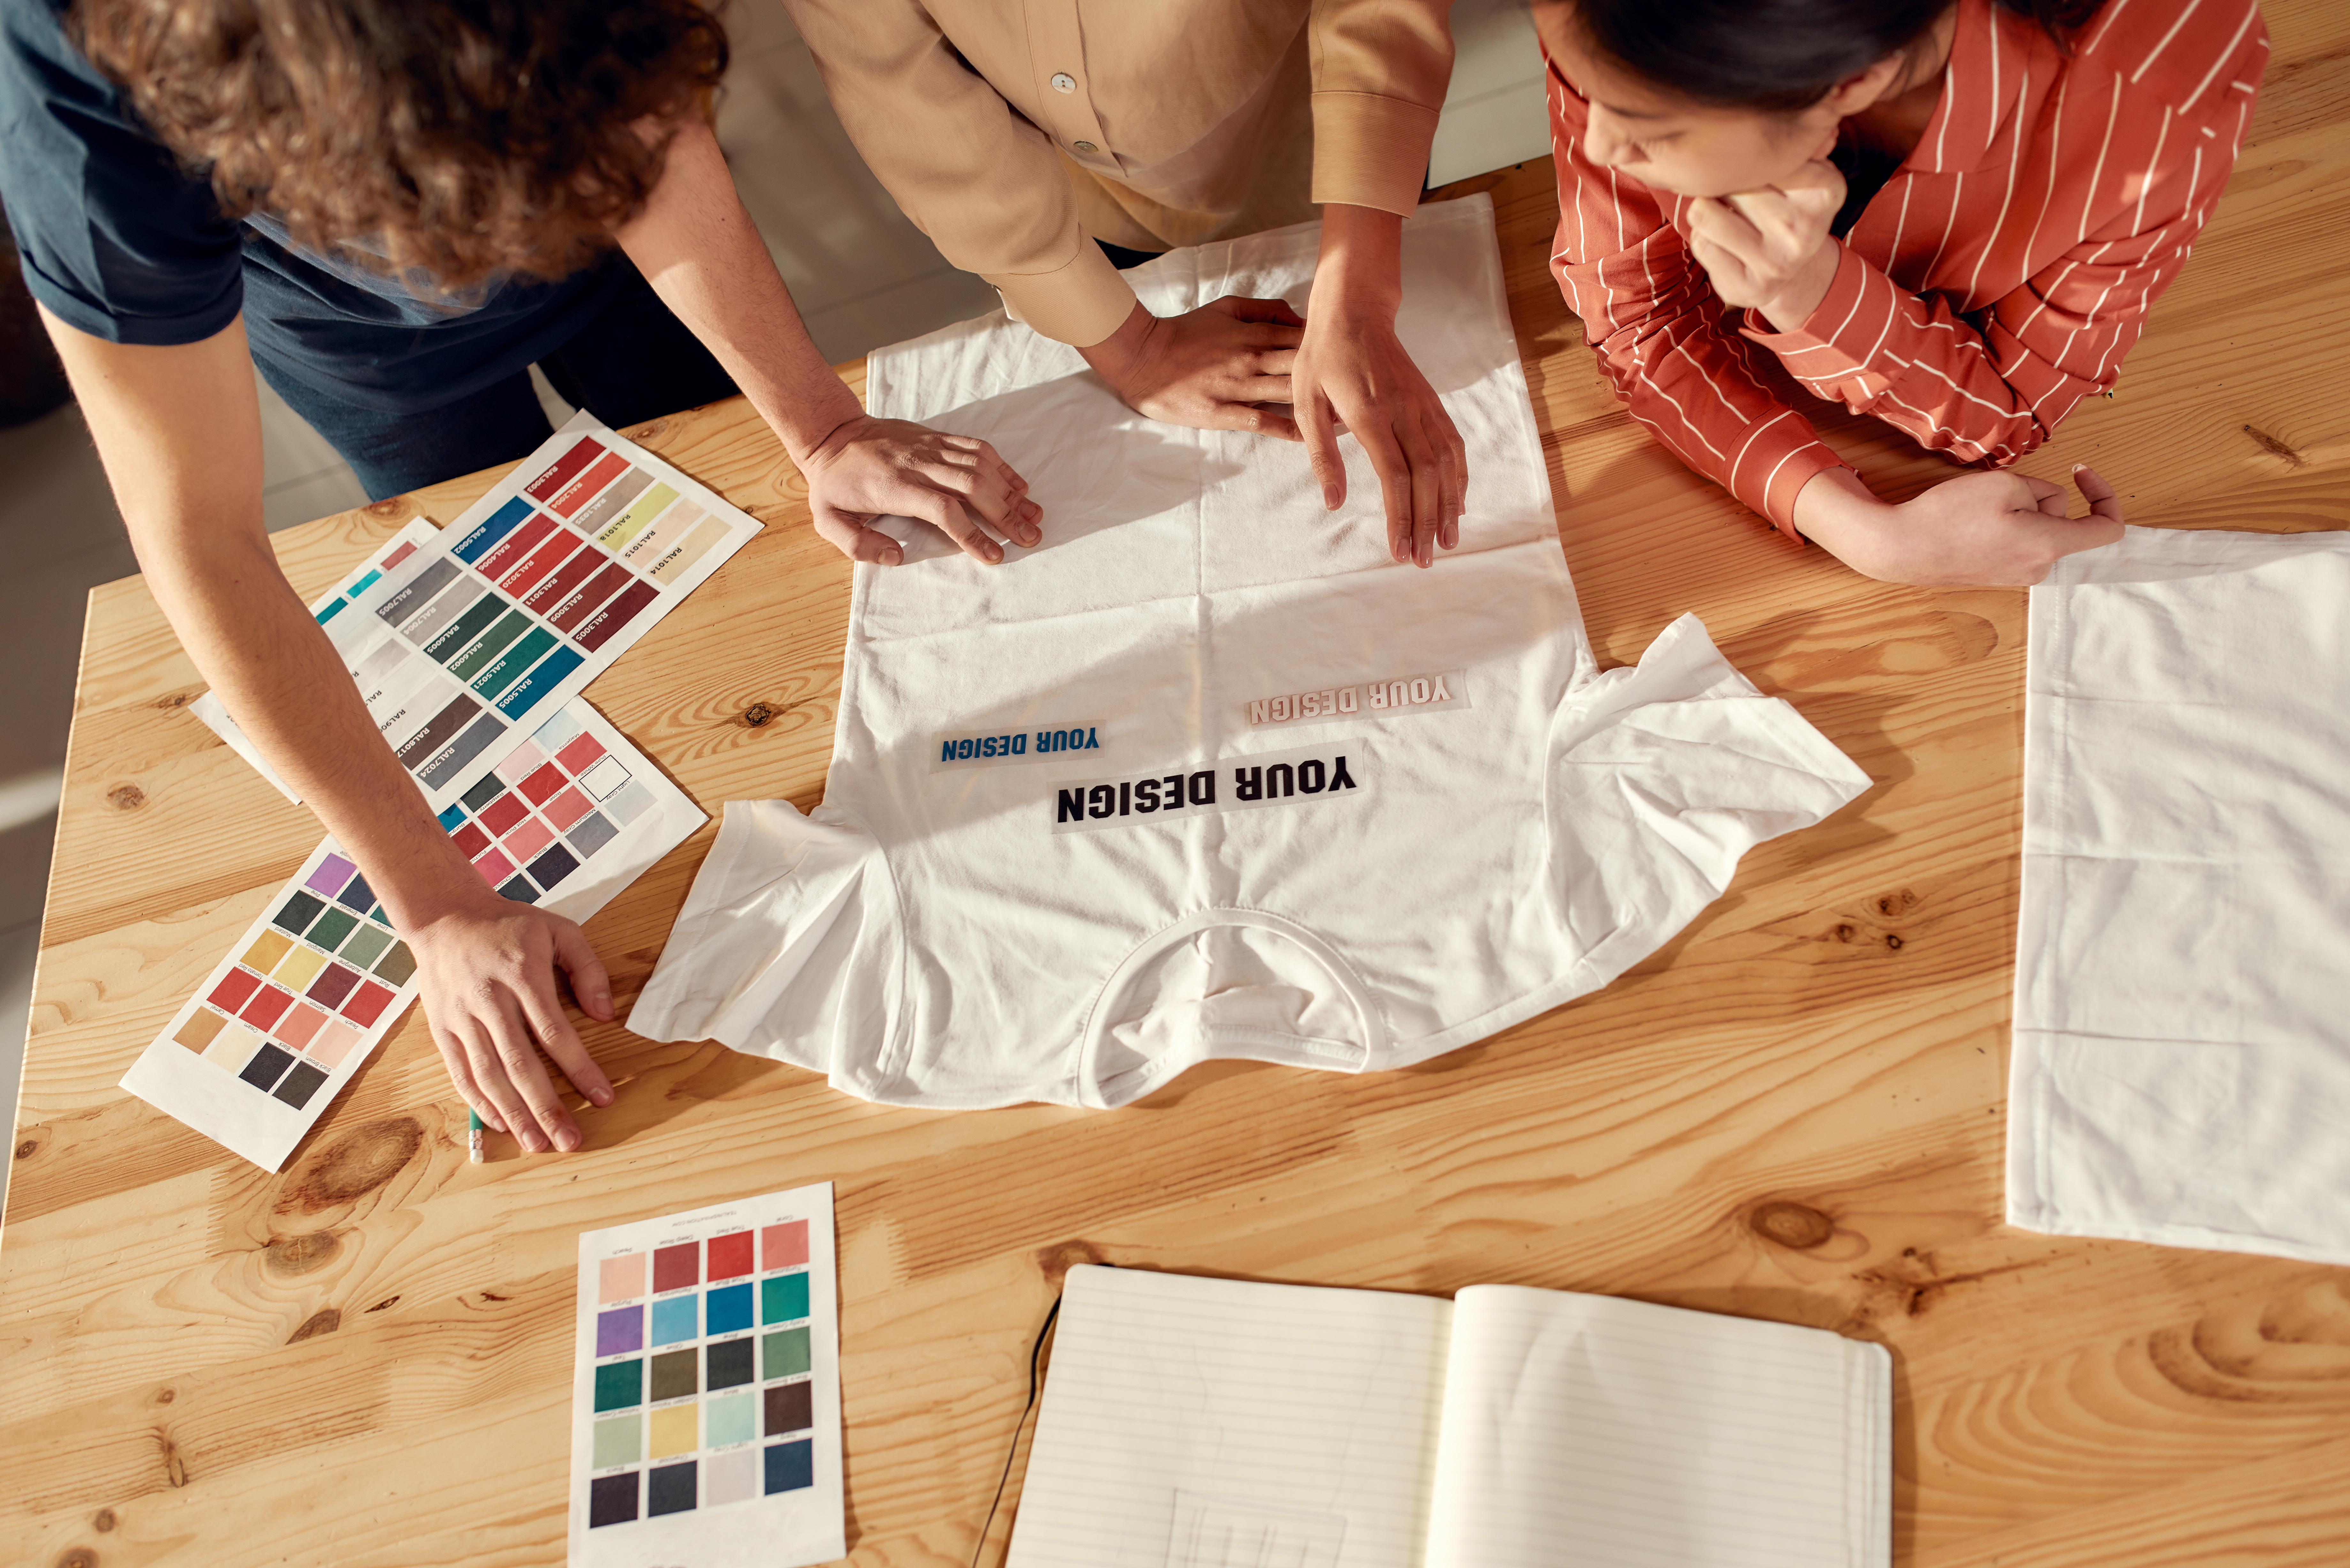 three people looking at color choices for a branded t-shirt design